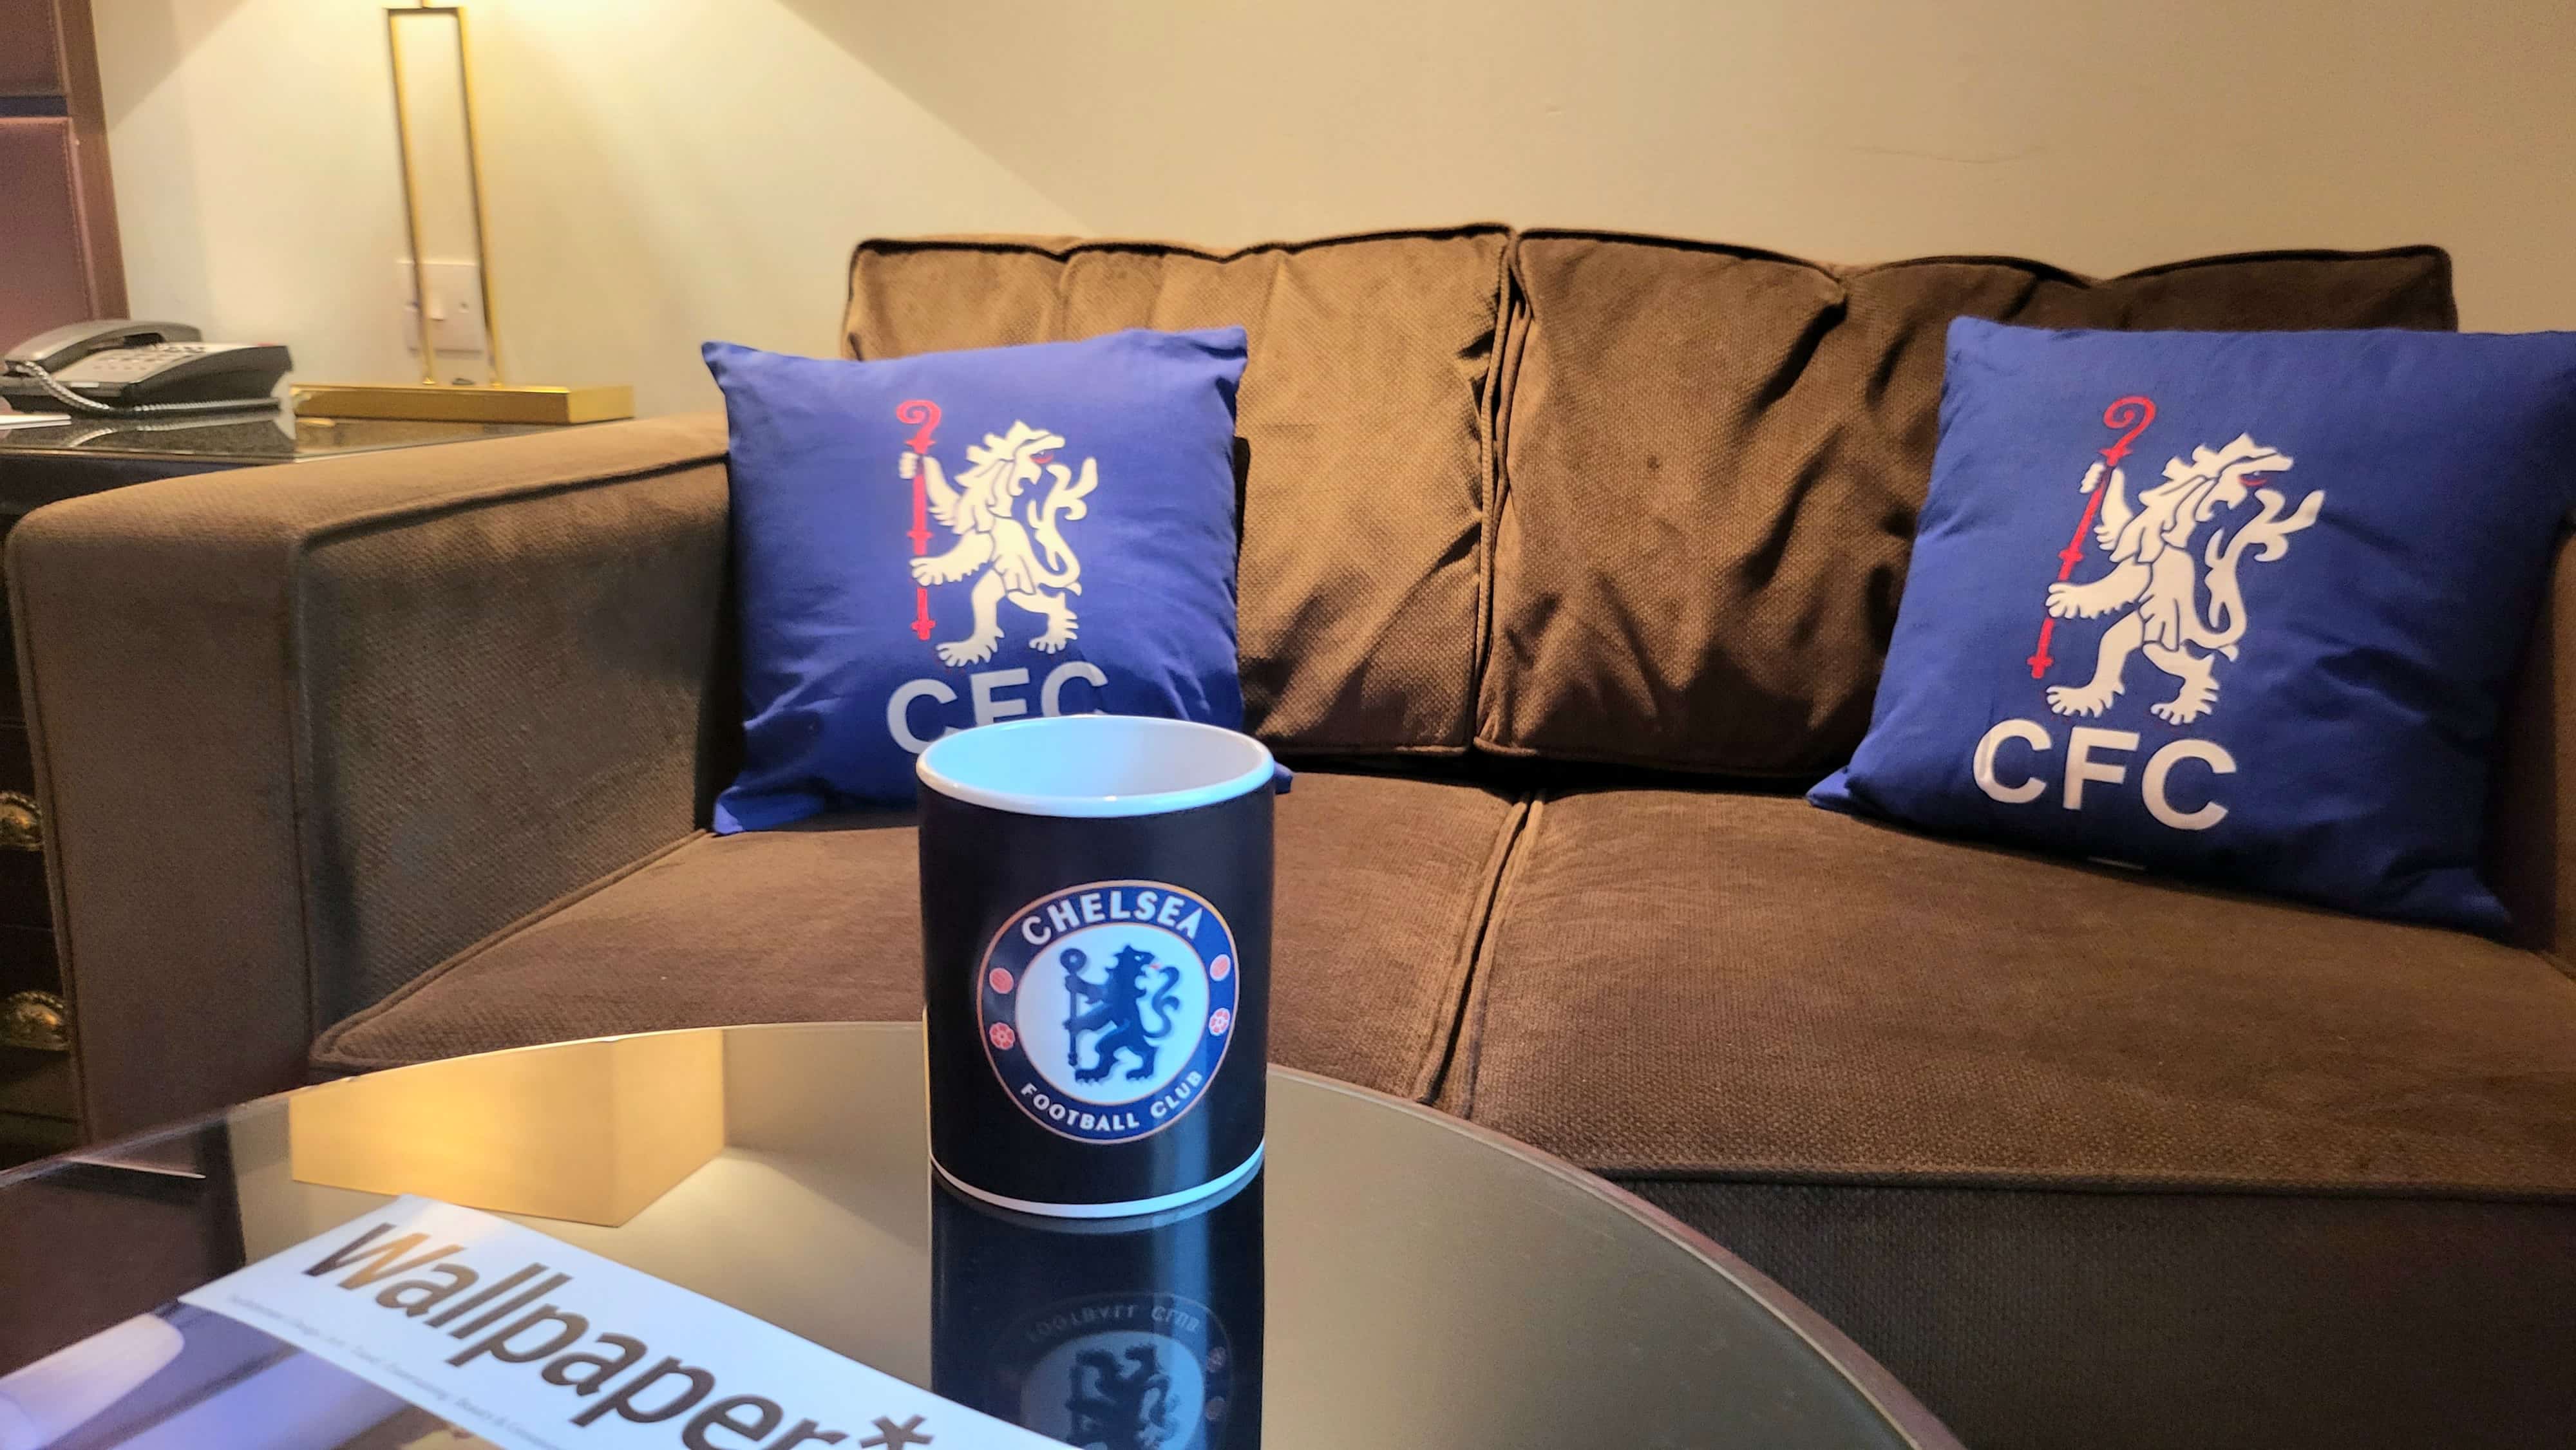 Chelsea FC mugs and pillows